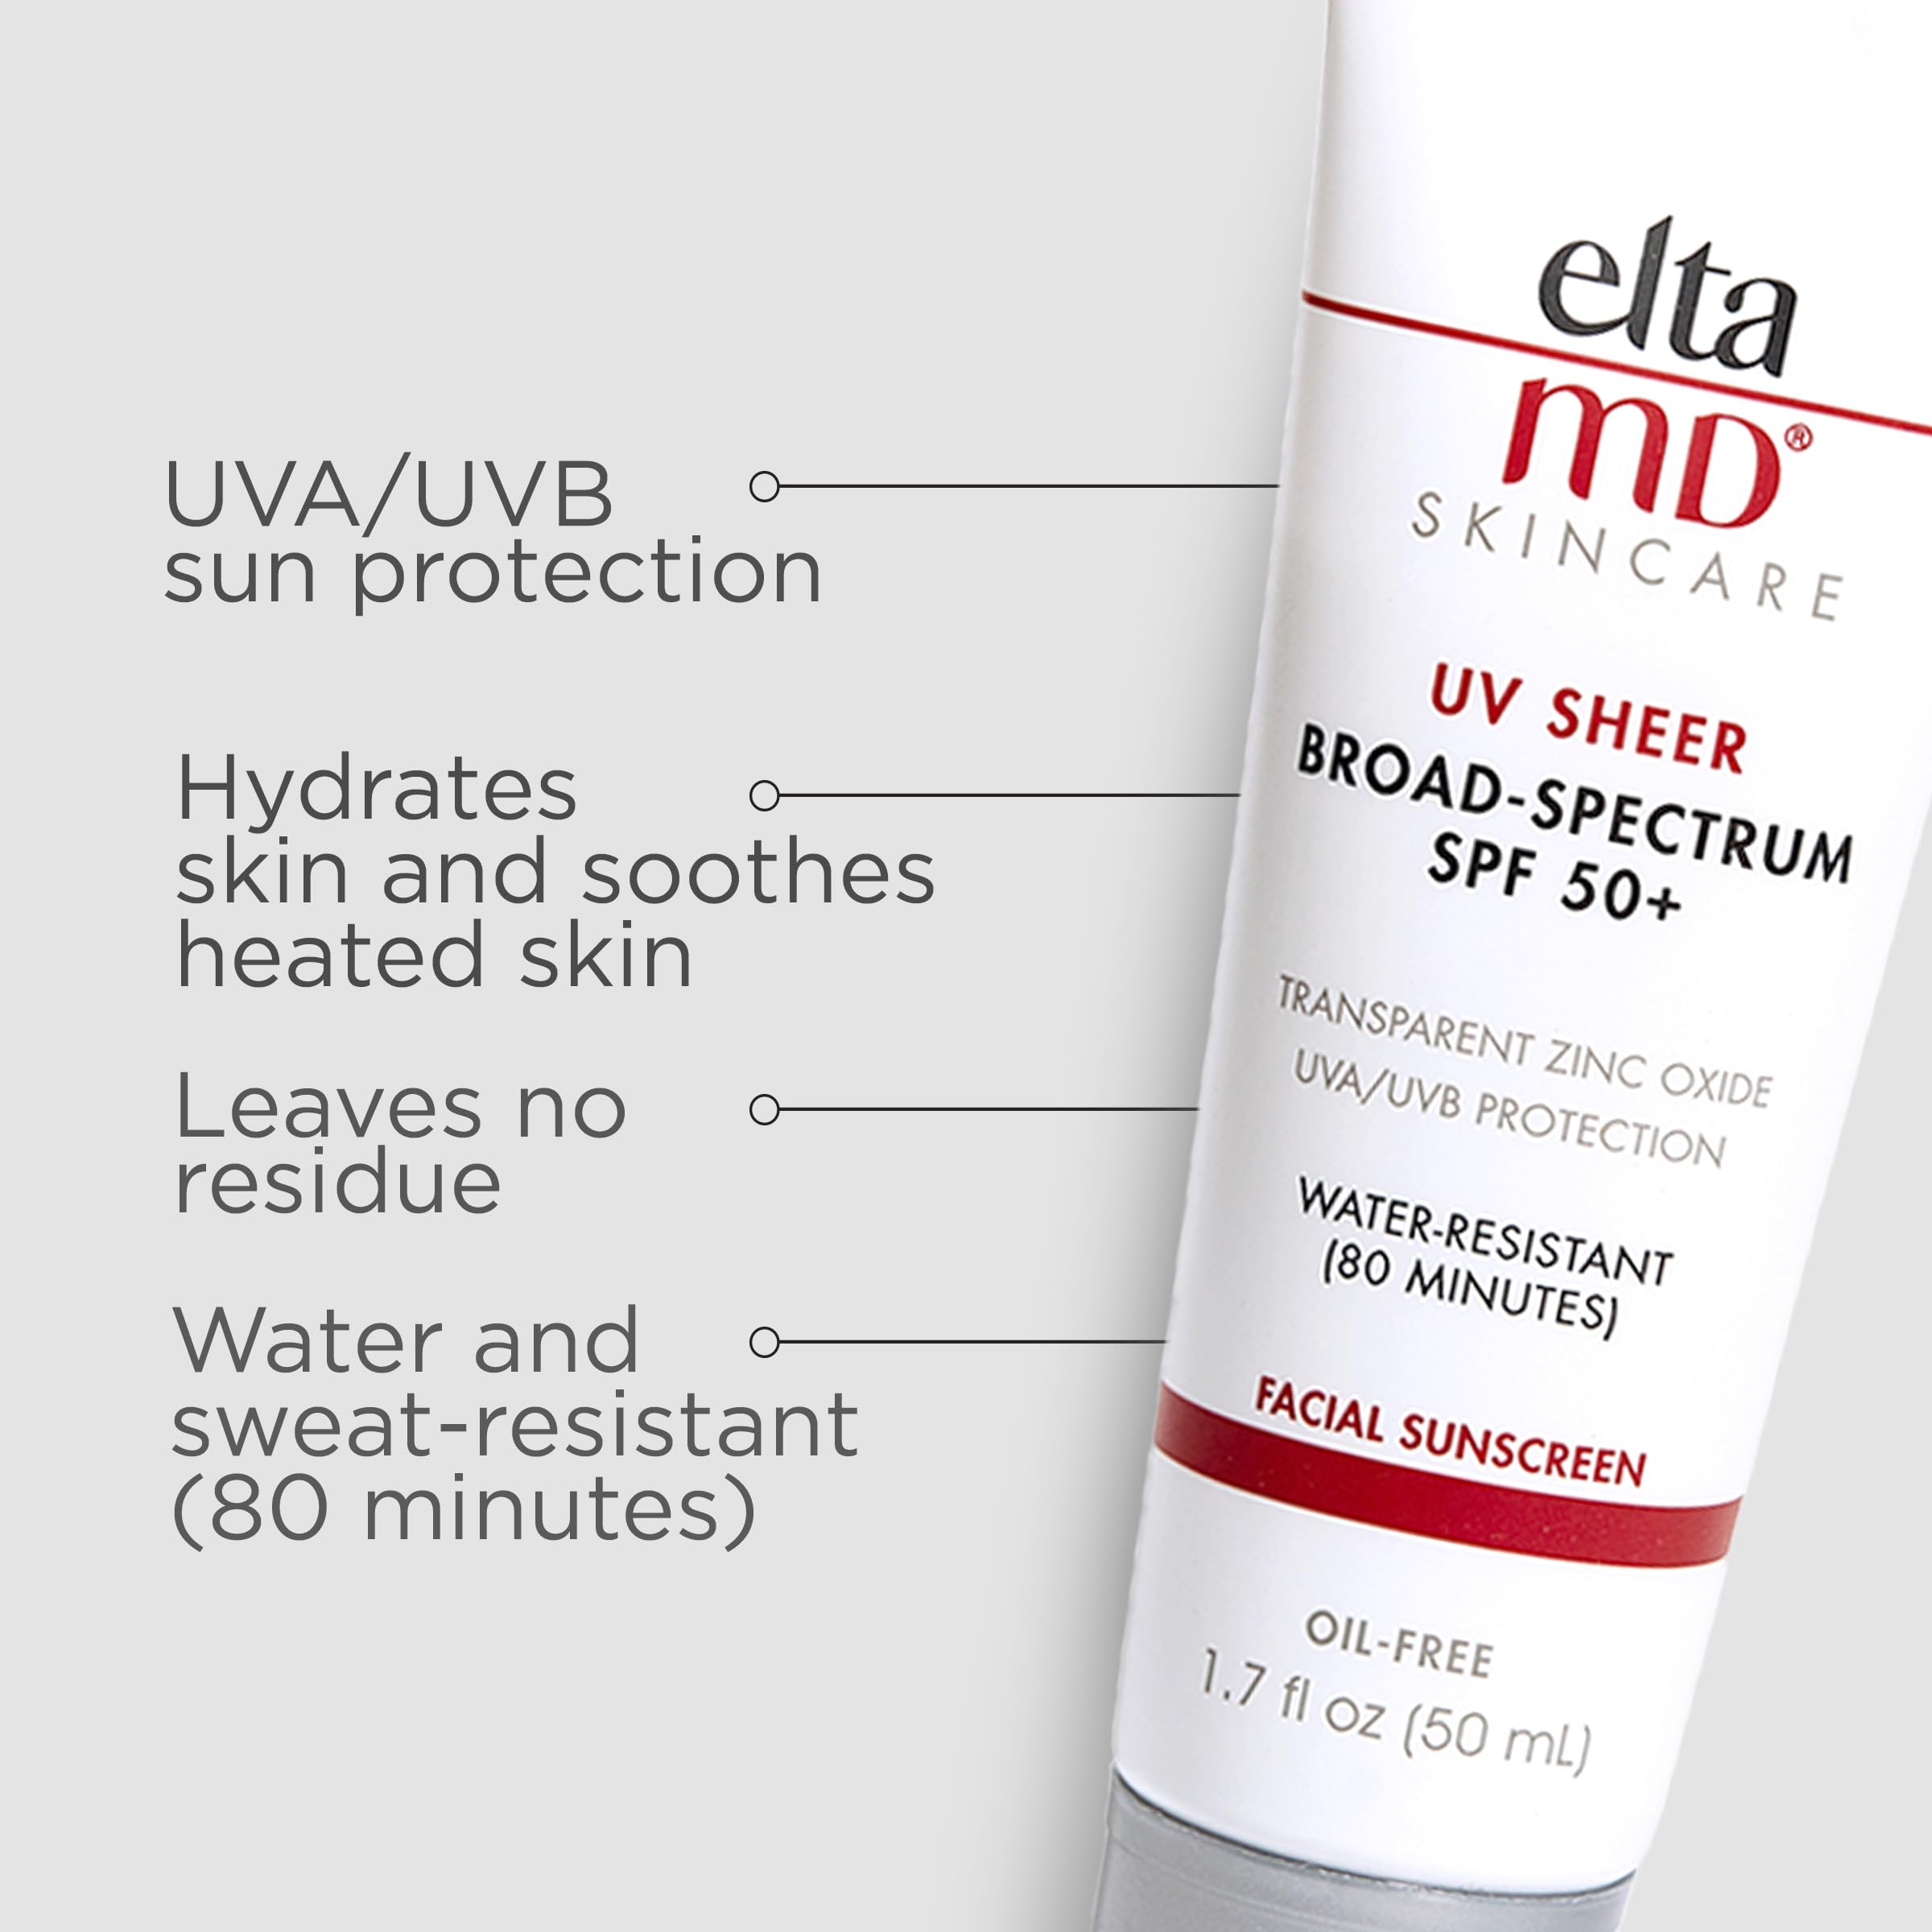 EltaMD UV Sheer Face Sunscreen, SPF 50+ Hydrating Sunscreen for Face, Helps Even Skin Tones and Soothes Skin, Water Resistant up to 80 Minutes, No White Cast